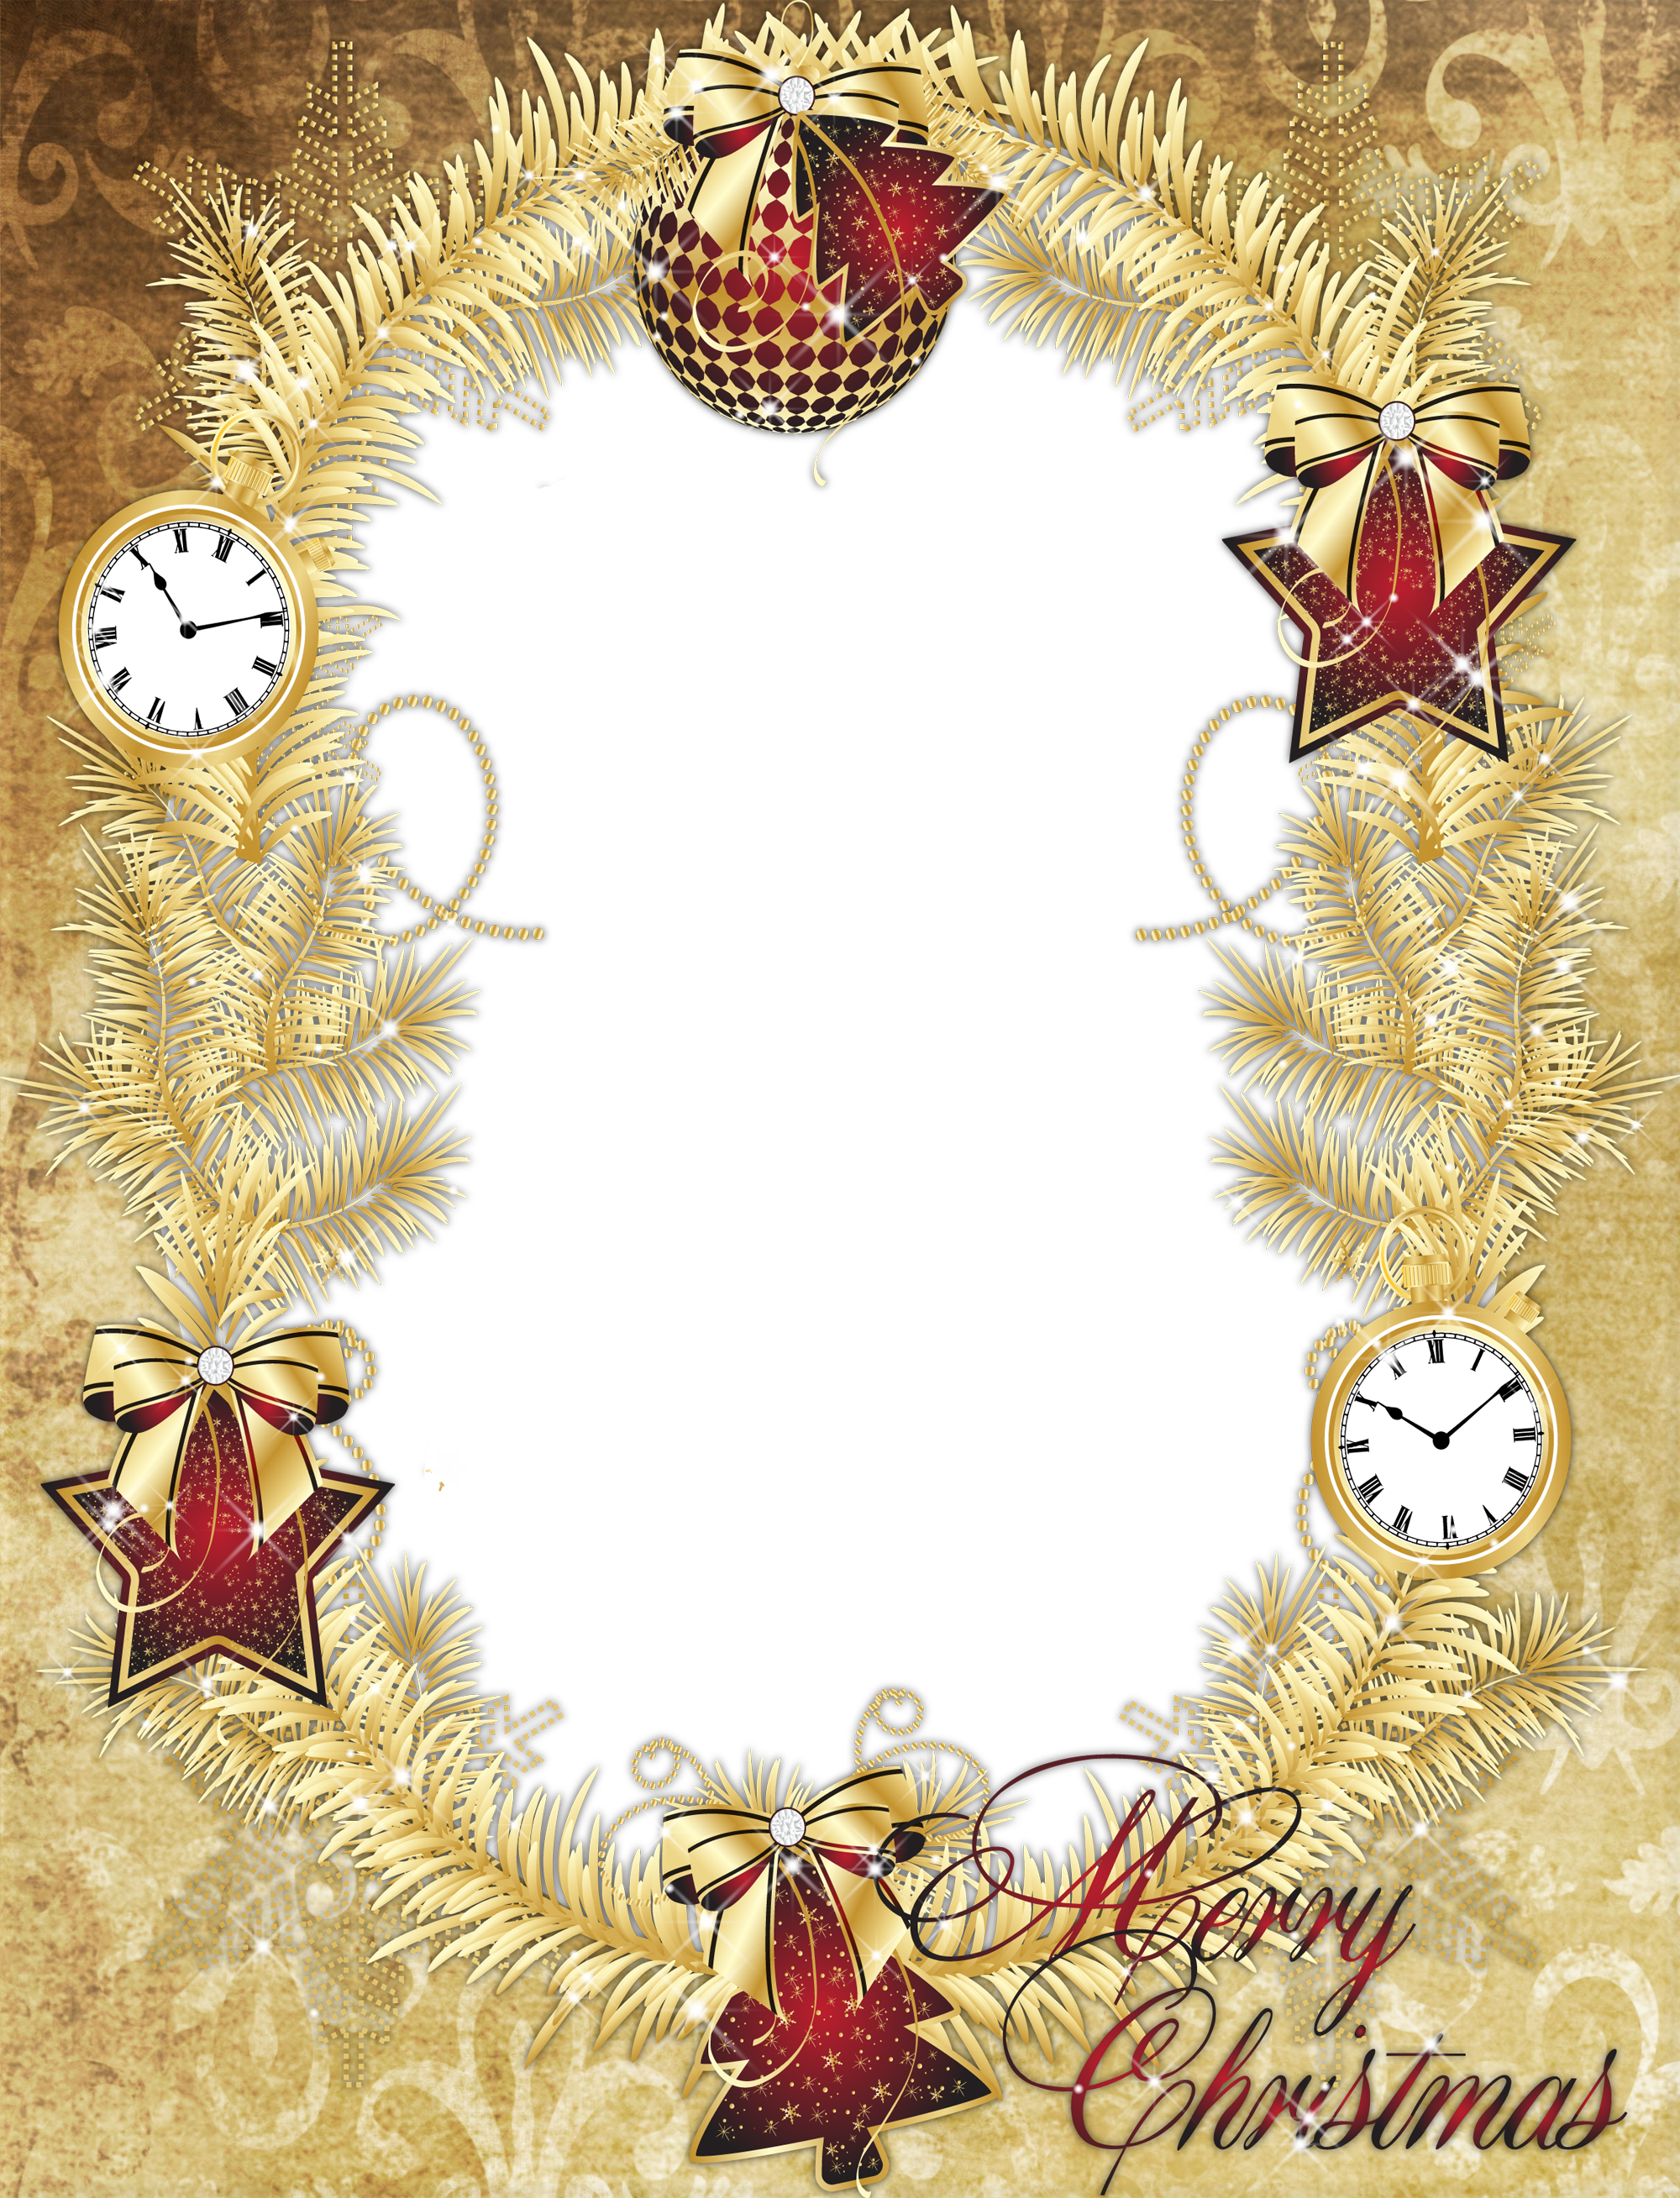 Pattern Christmas Free Transparent Image HQ PNG Image